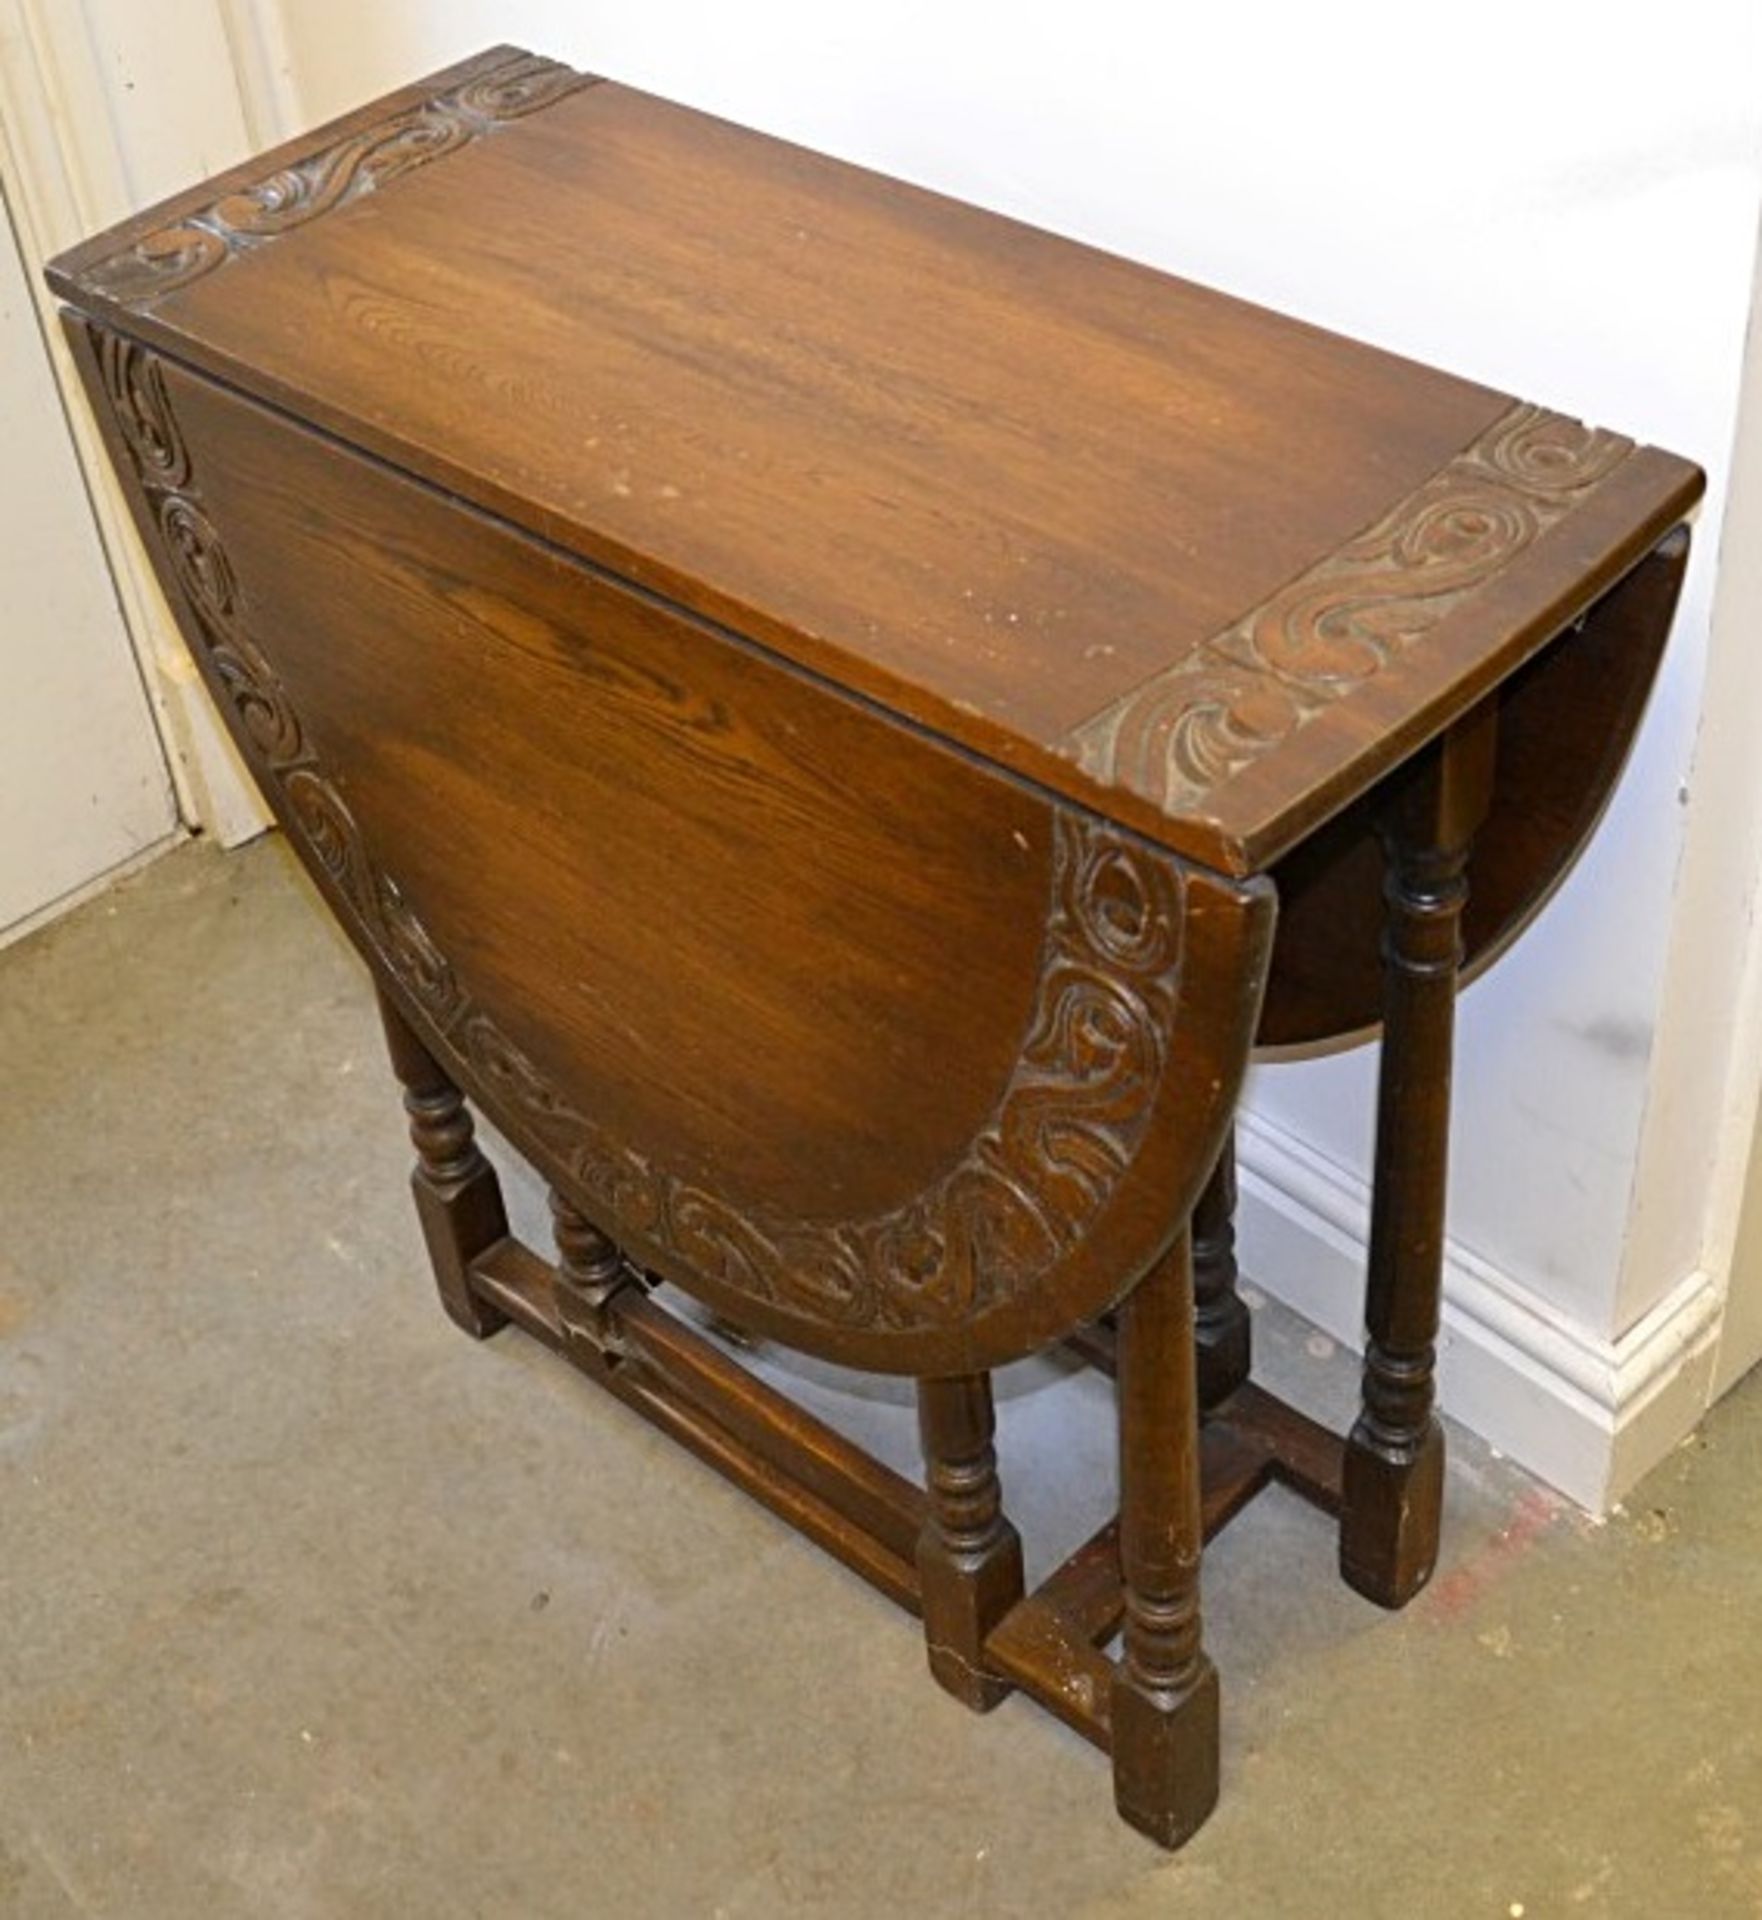 1 x Vintage Drop Leaf Solid Wood Table With Carved Floral Decoration - From A Grade II Listed Hall - Image 2 of 9